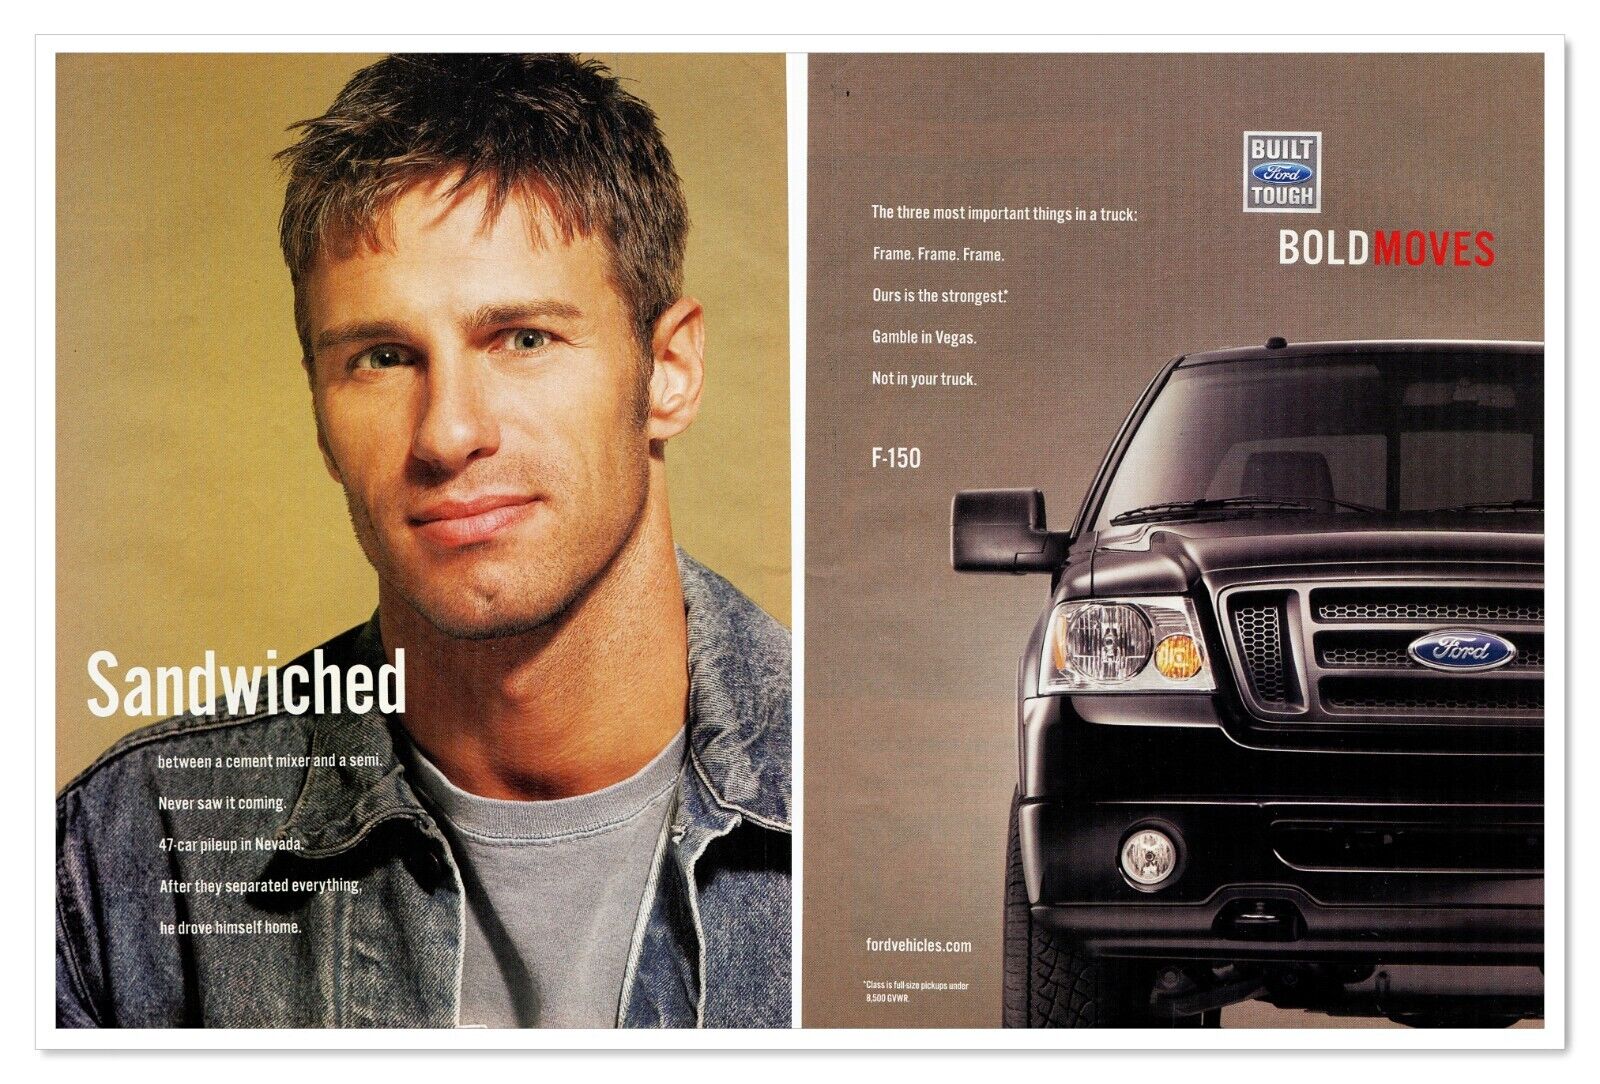 Ford F-150 Strongest Frame Bold Moves 2006 2-Page Print Magazine Truck Ad